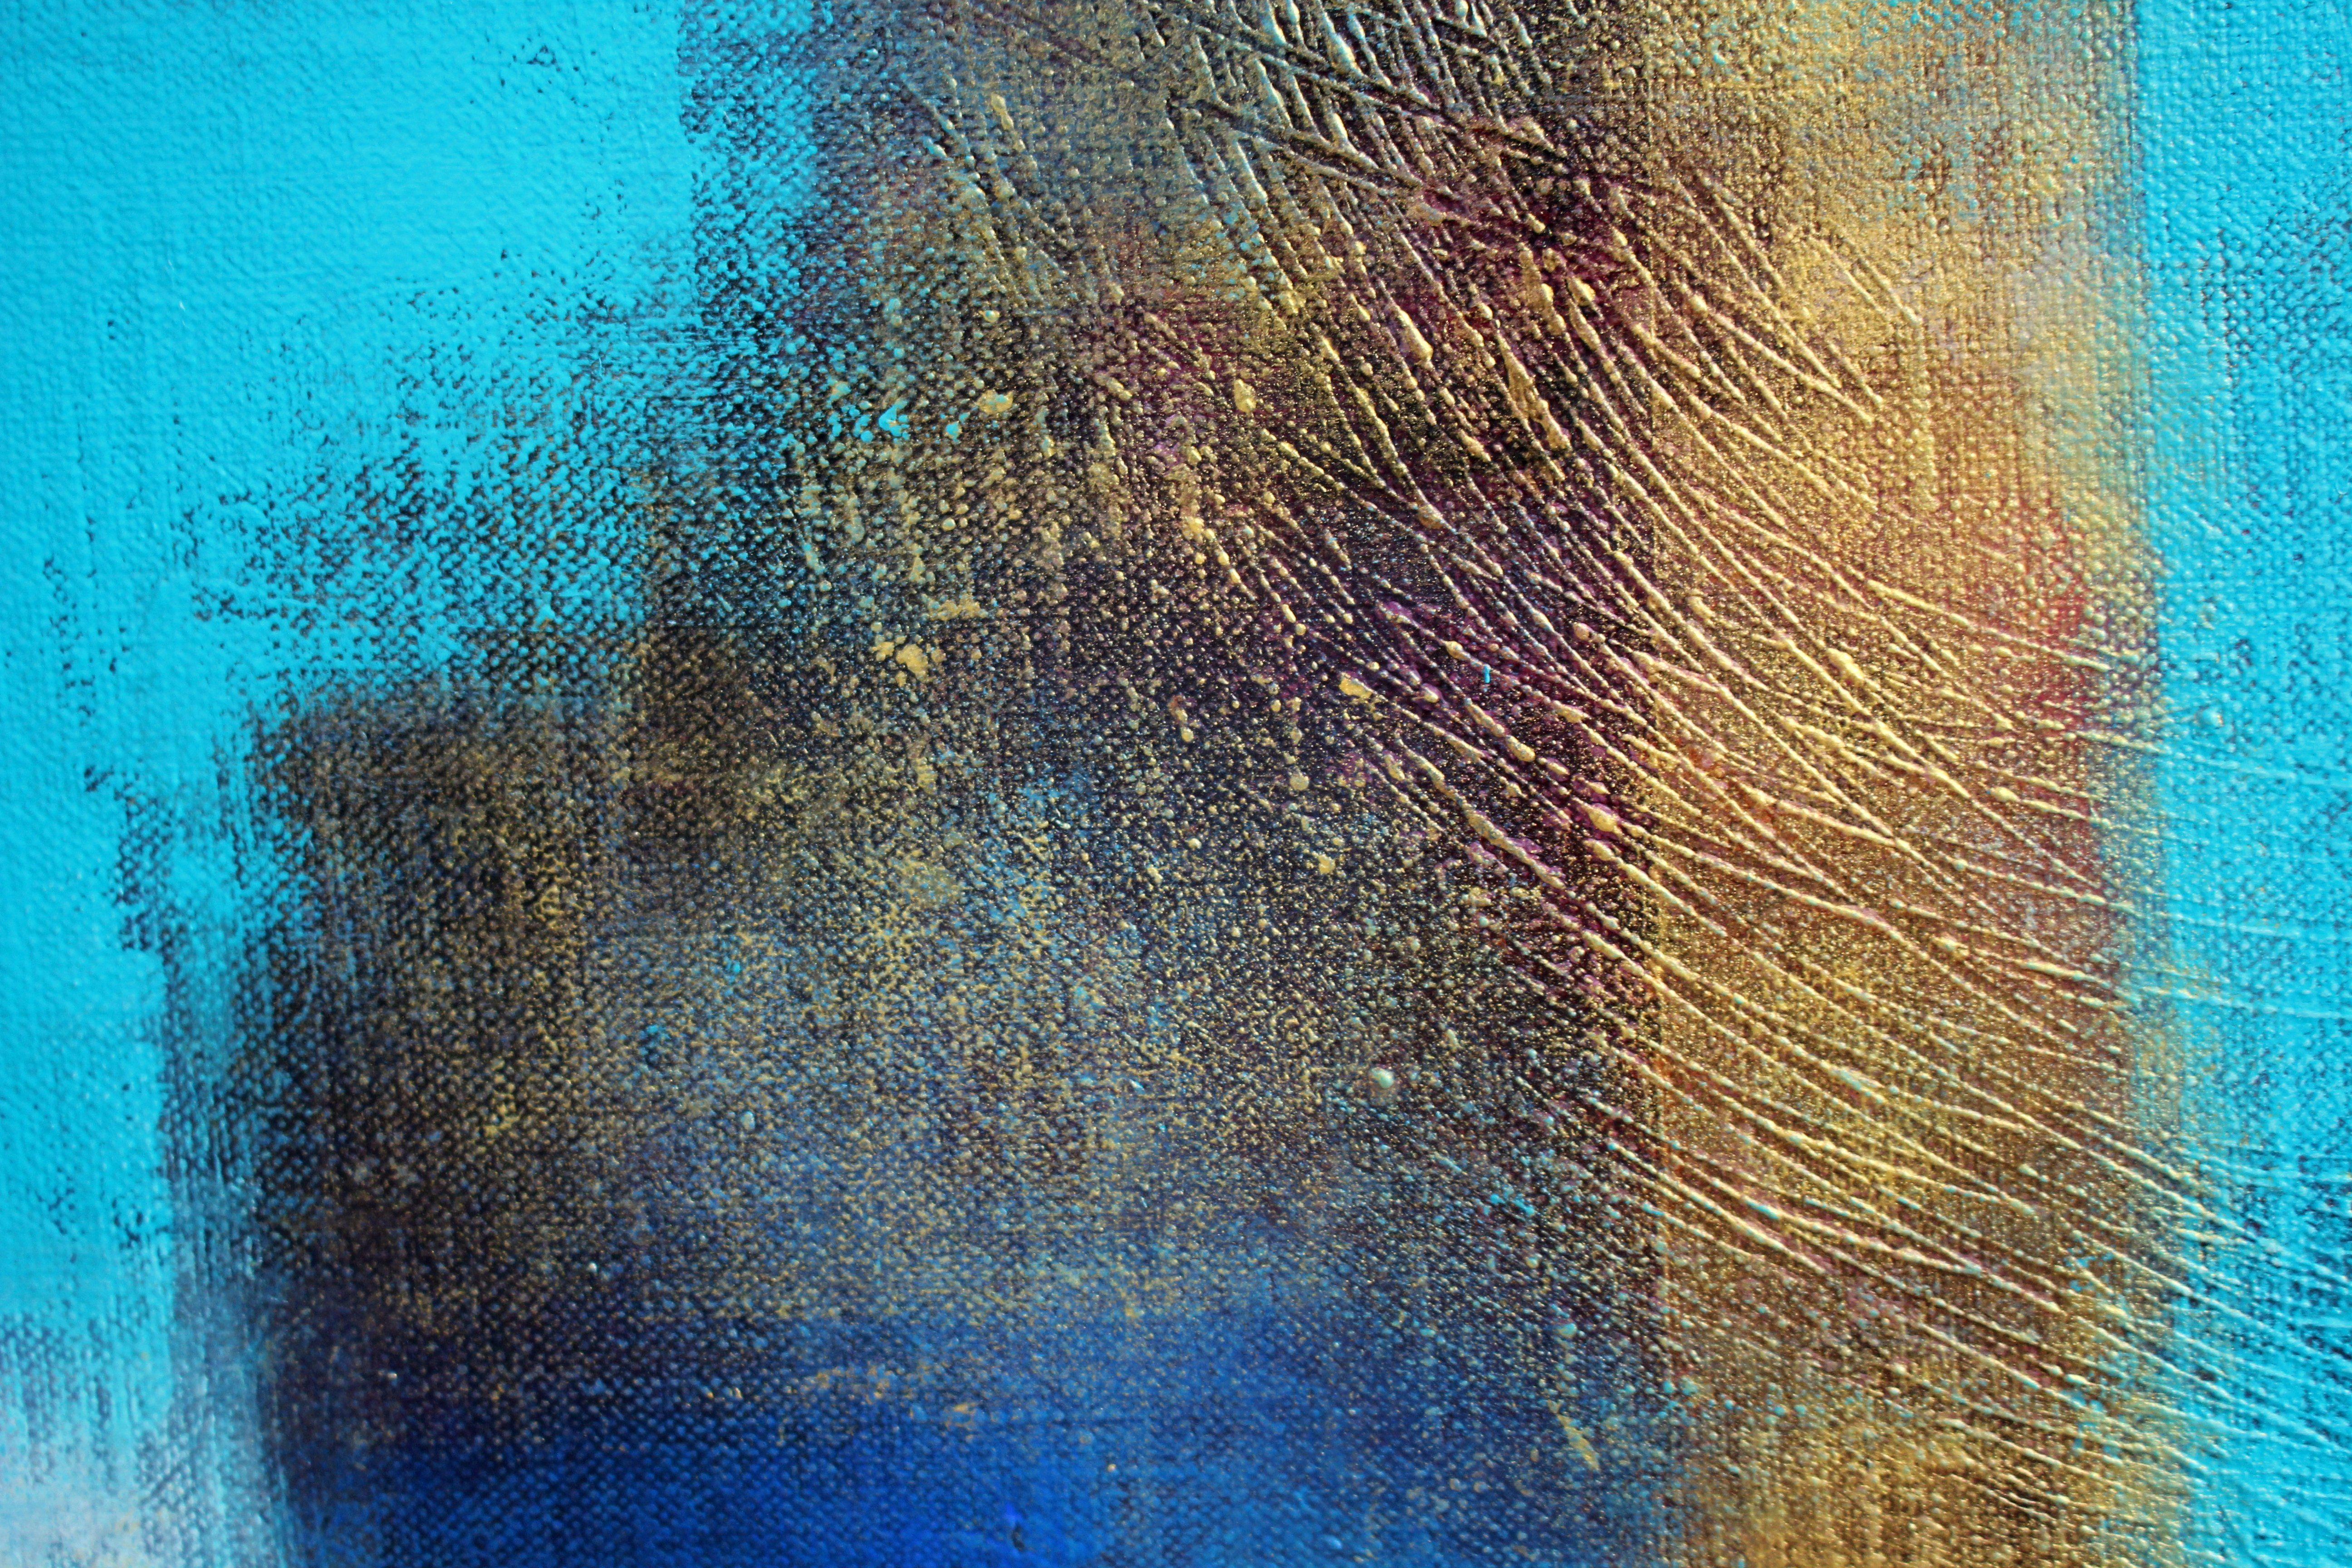 Acrylic painting made on a frame and varnished, signed and sold ready to hang. It is an abstract work painted with a brush and a spatula where vaporous effects contrast with the flamboyant colors used: blue, red, gold ... This work is unique, there